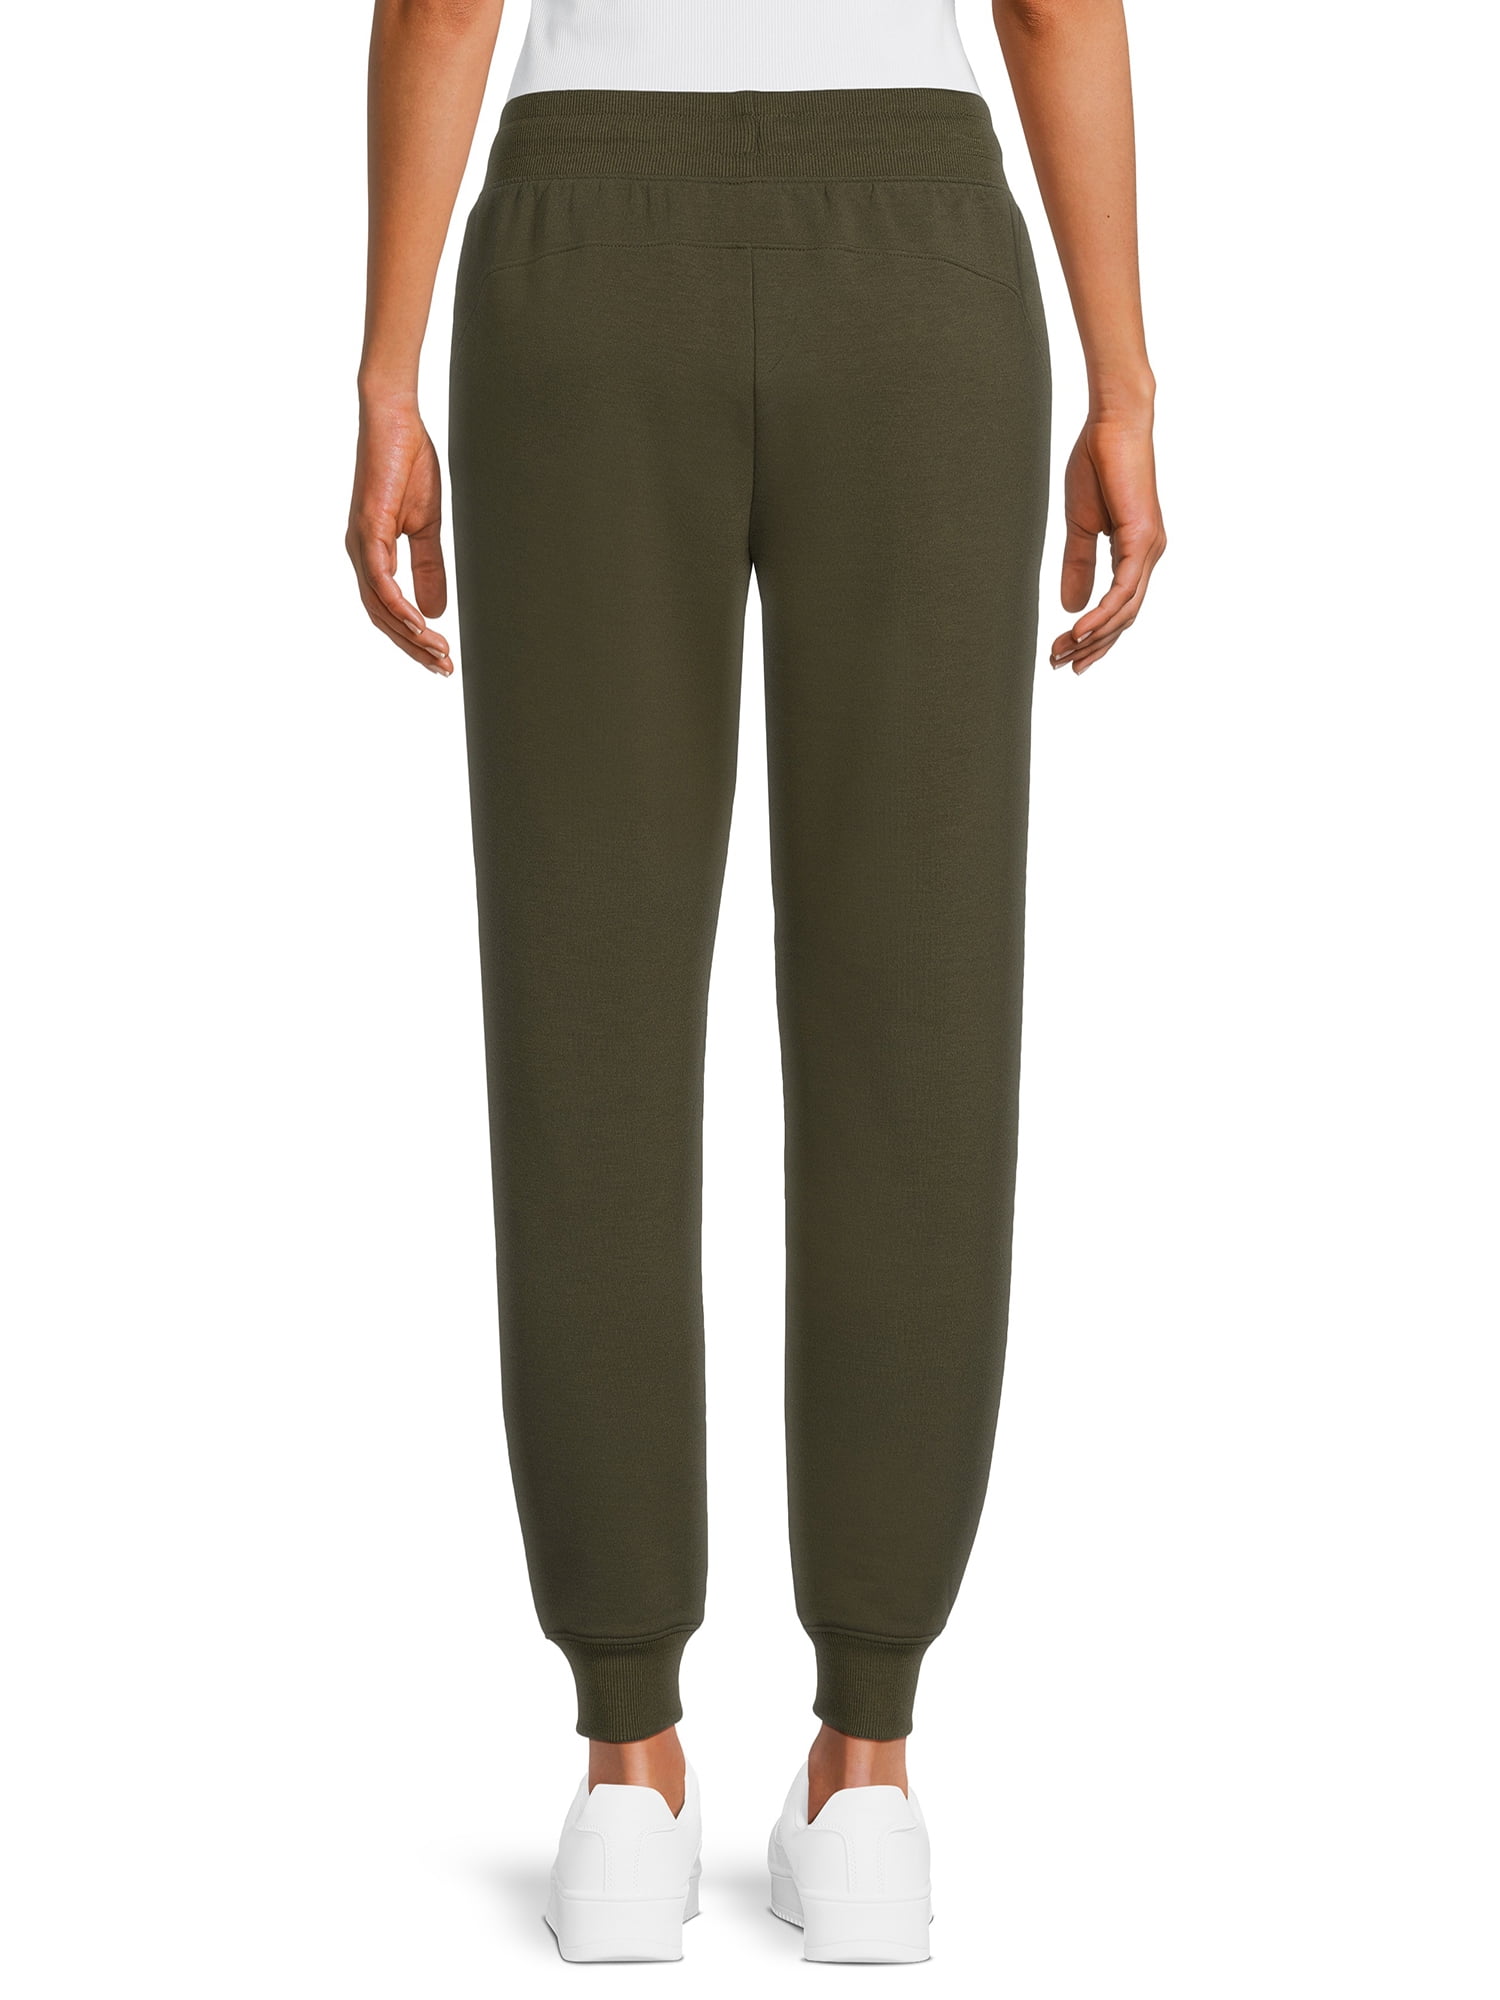 Athletic Works Women's Athleisure Soft Jogger Pant